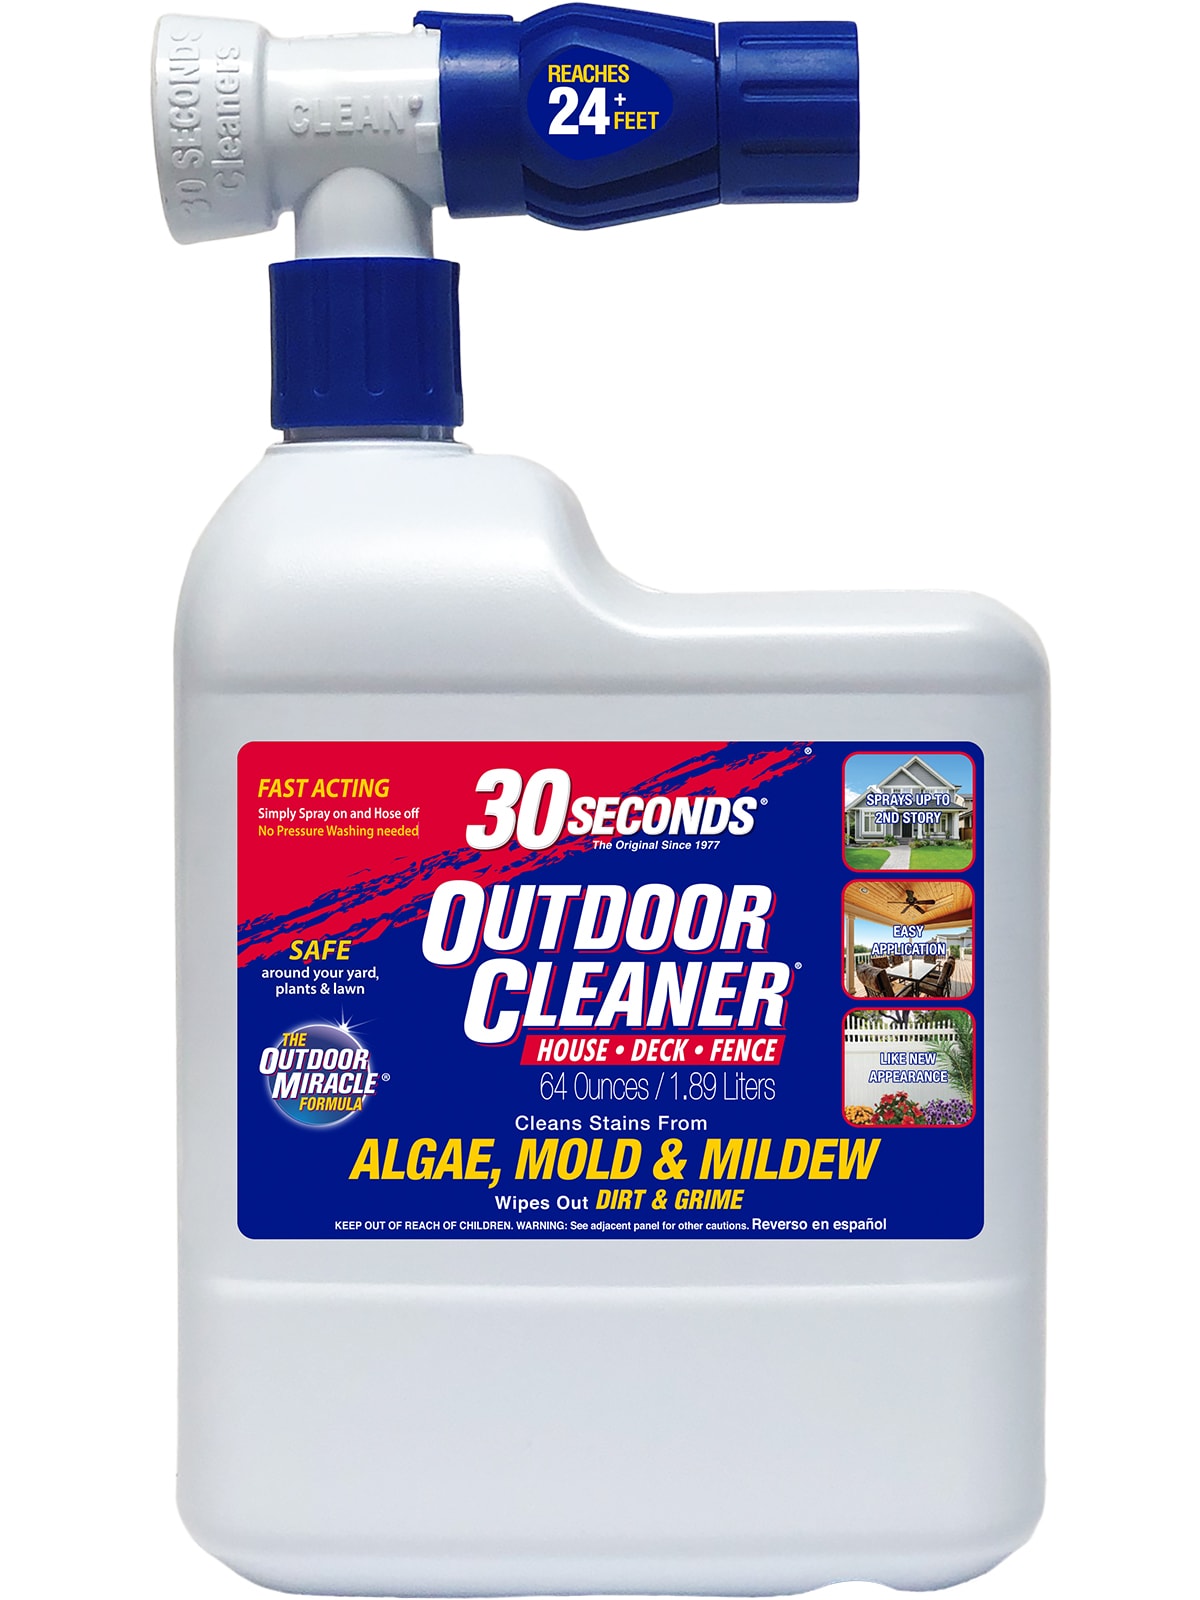 Cleaning Products - Mountain View RV Store & Camping Supplies